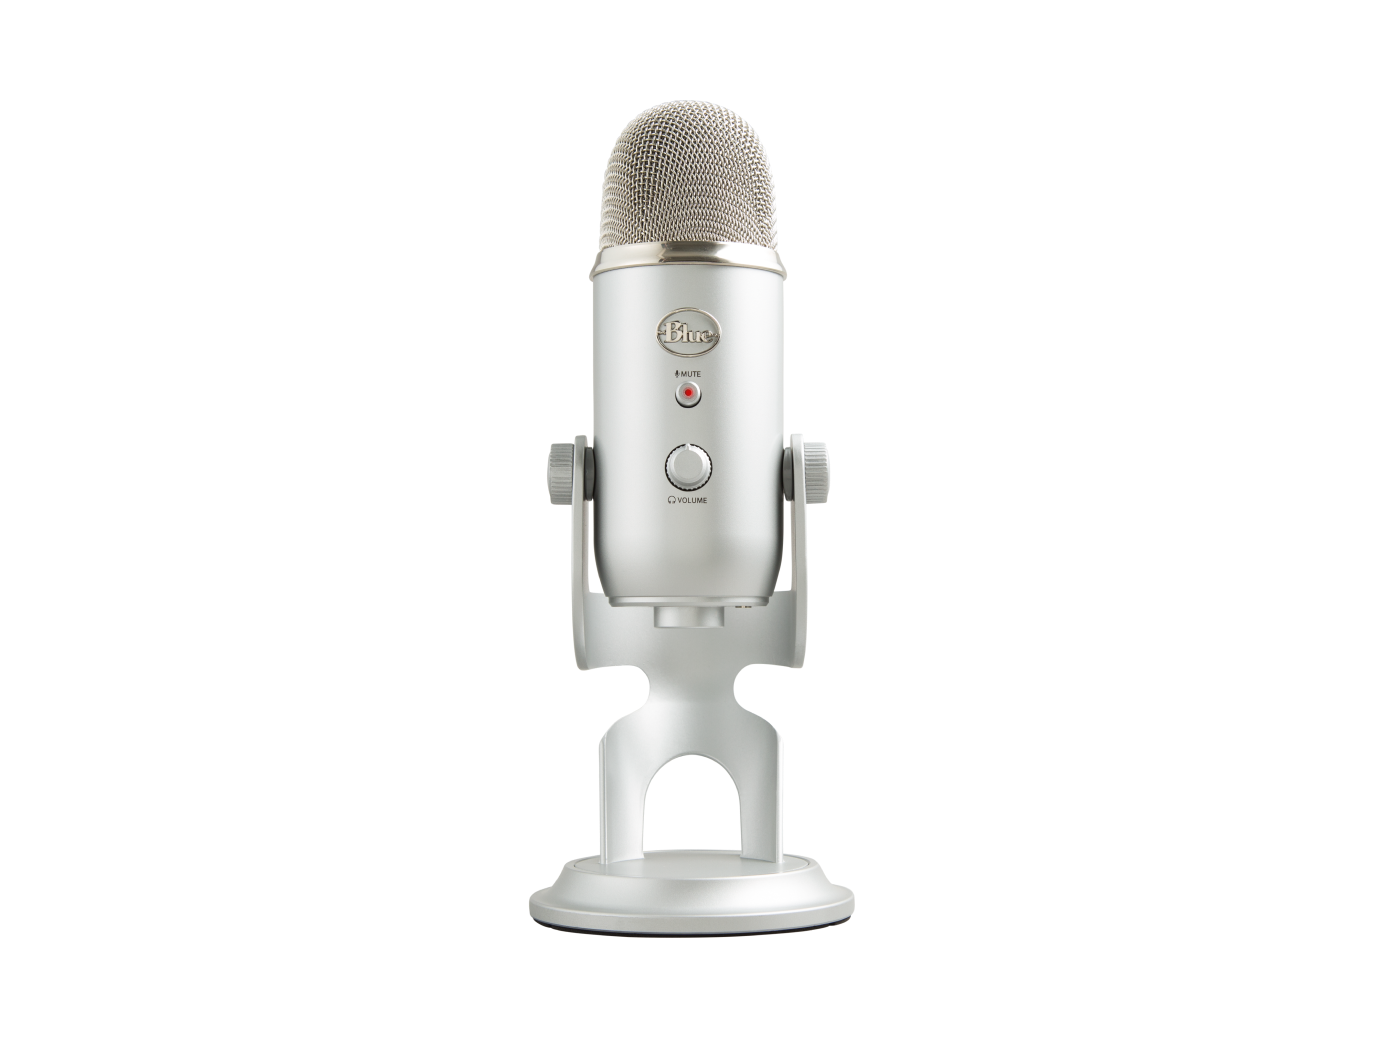 https://resource.logitech.com/content/dam/gaming/en/products/streaming-gear/yeti-premium-usb-microphone/gallery/yeti-microphones-front-view-silver.png